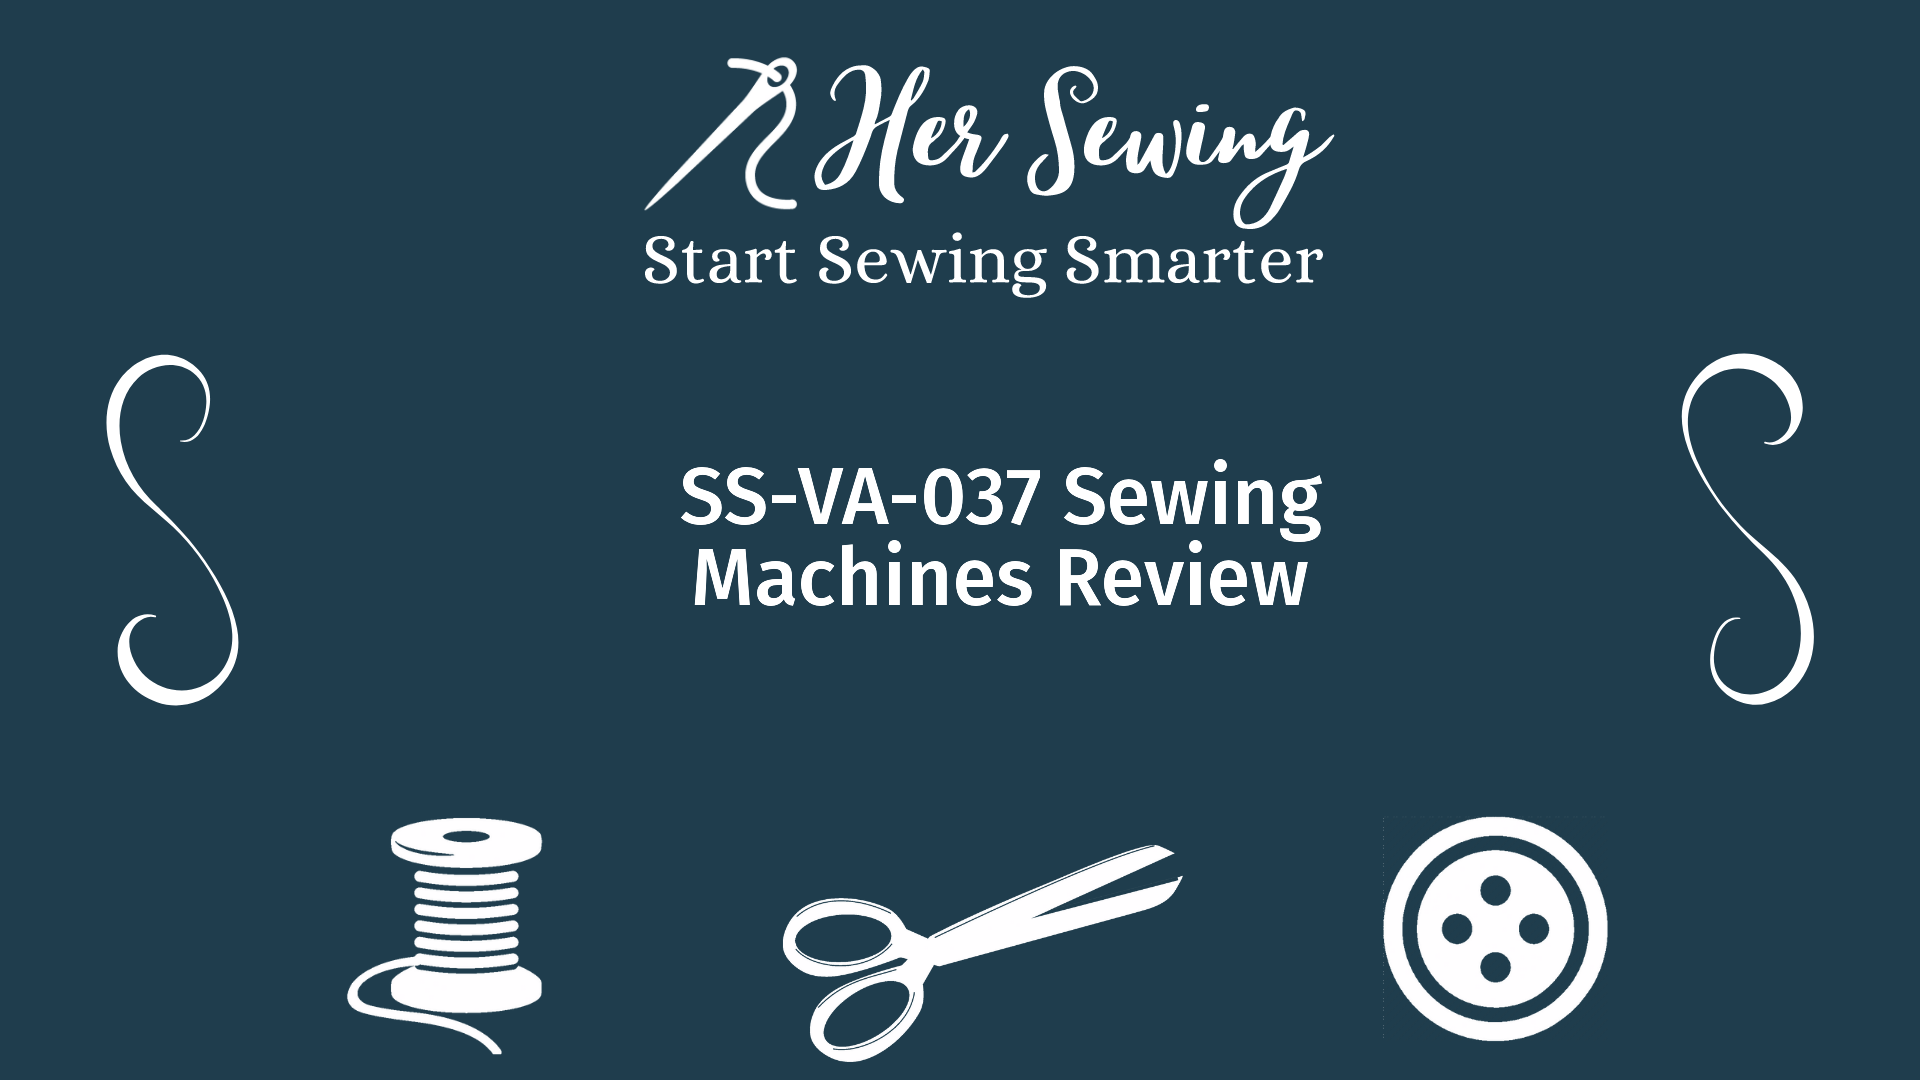 SS-VA-037 Sewing Machines Review